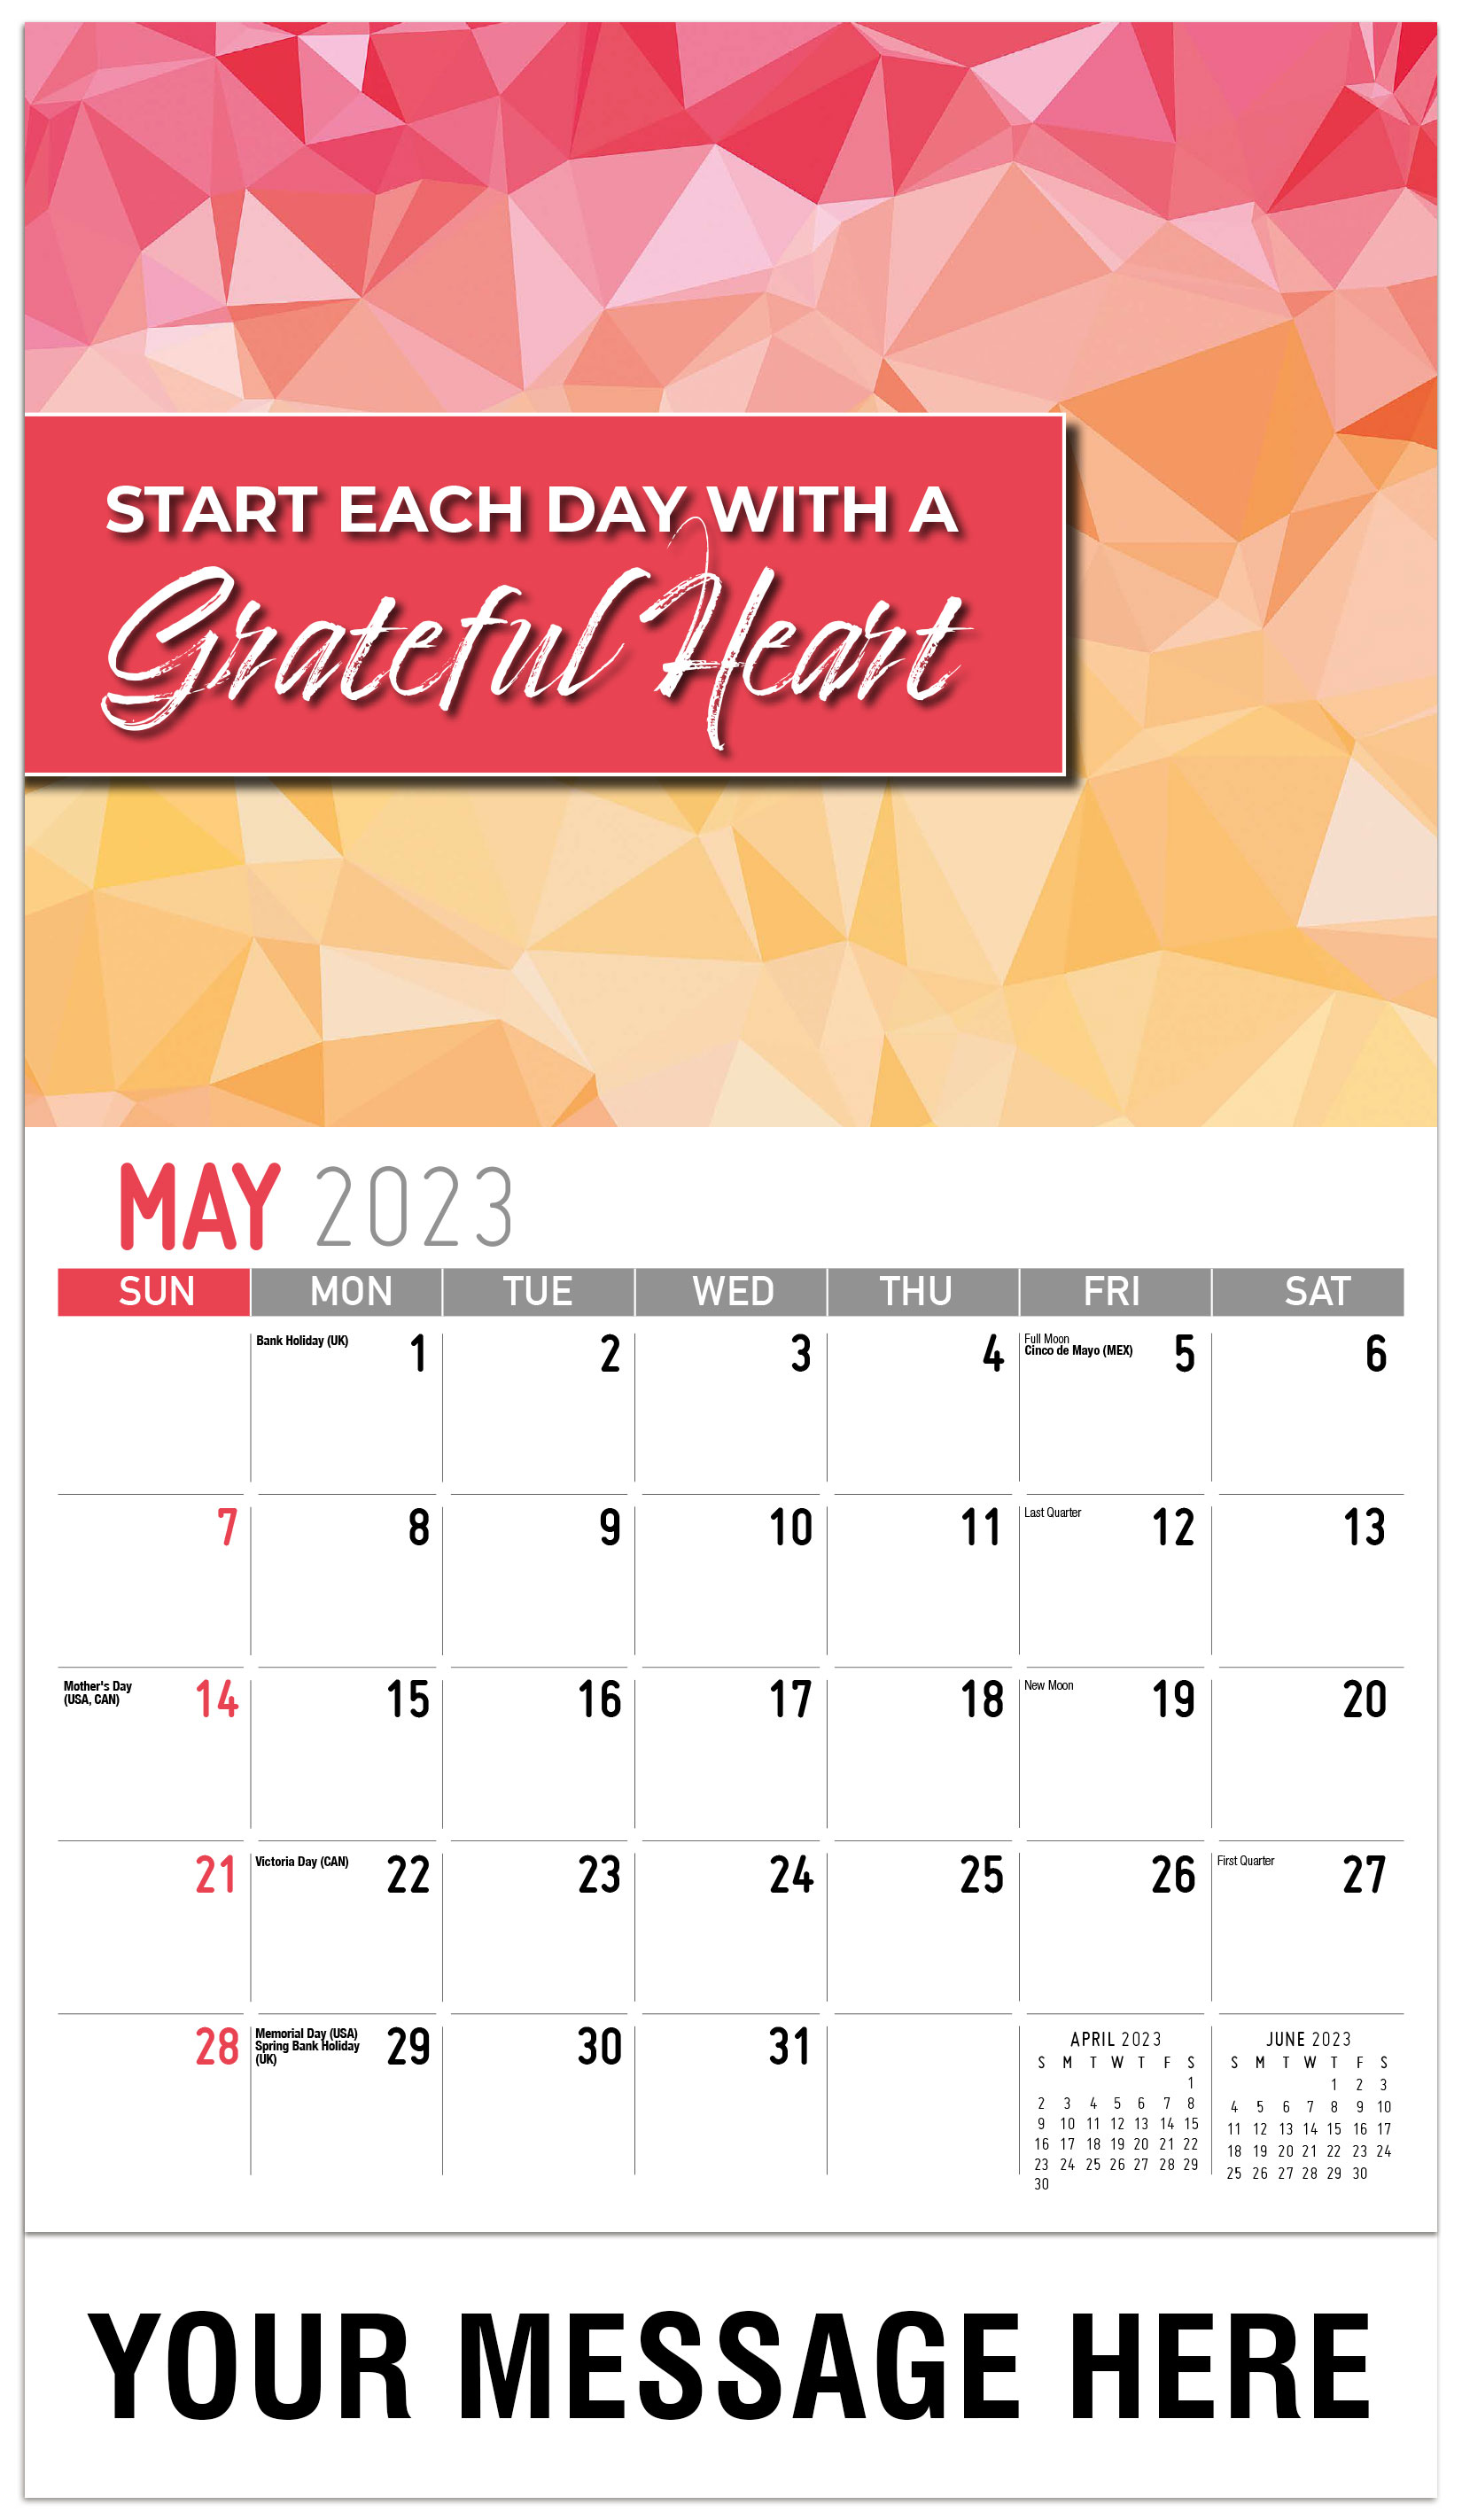 Start Each Day With A 
Greatful Heart - May - Arts and Thoughts 2023 Promotional Calendar